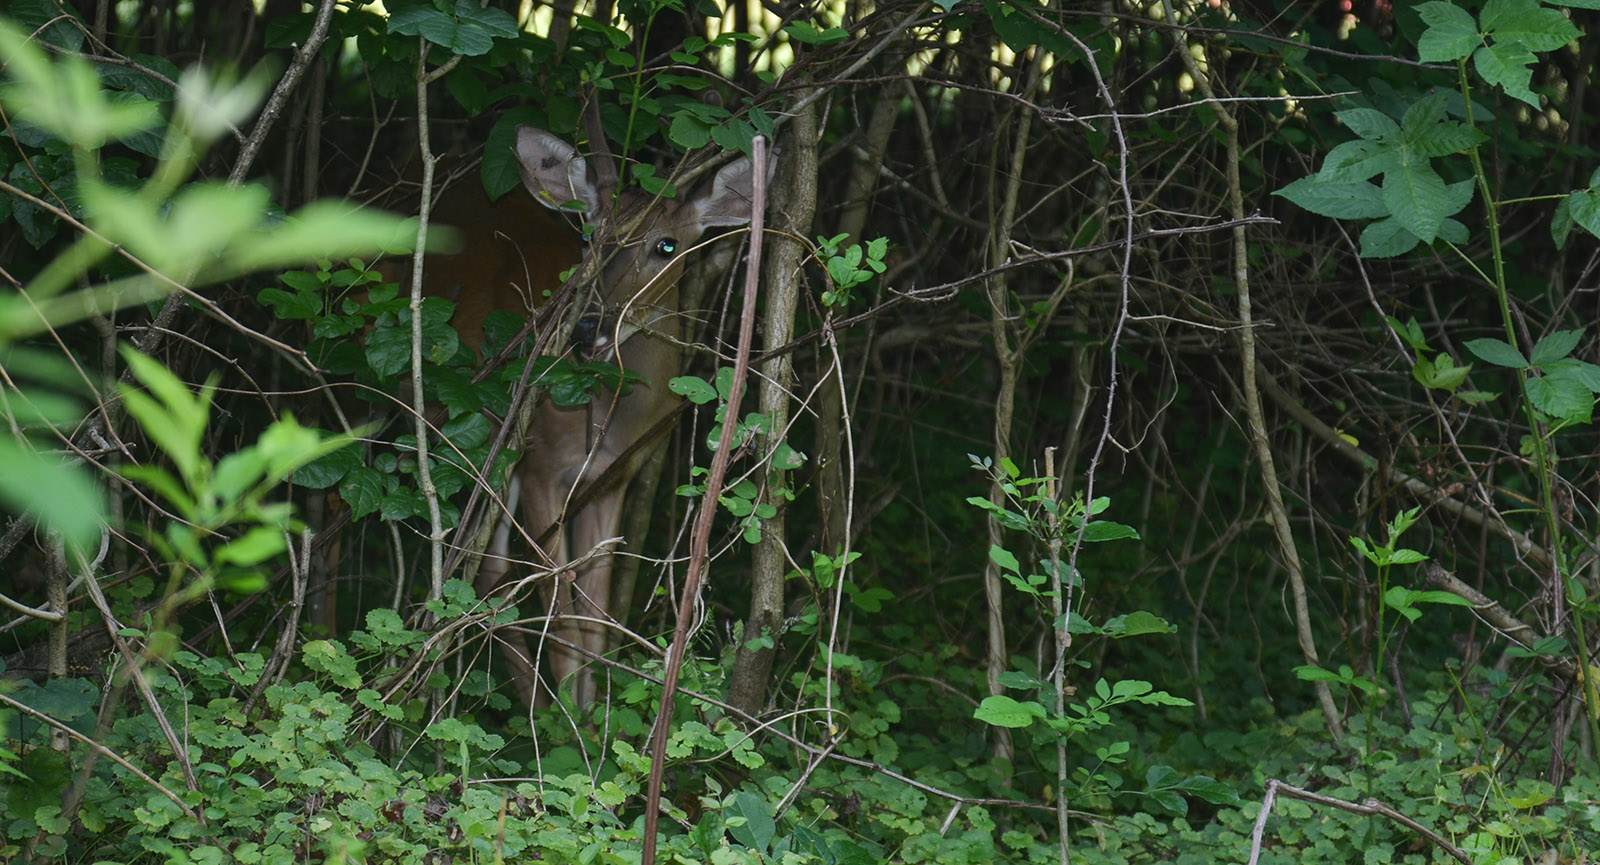 A photo of a young deer, barely visible, peeking out from a stand of young trees.